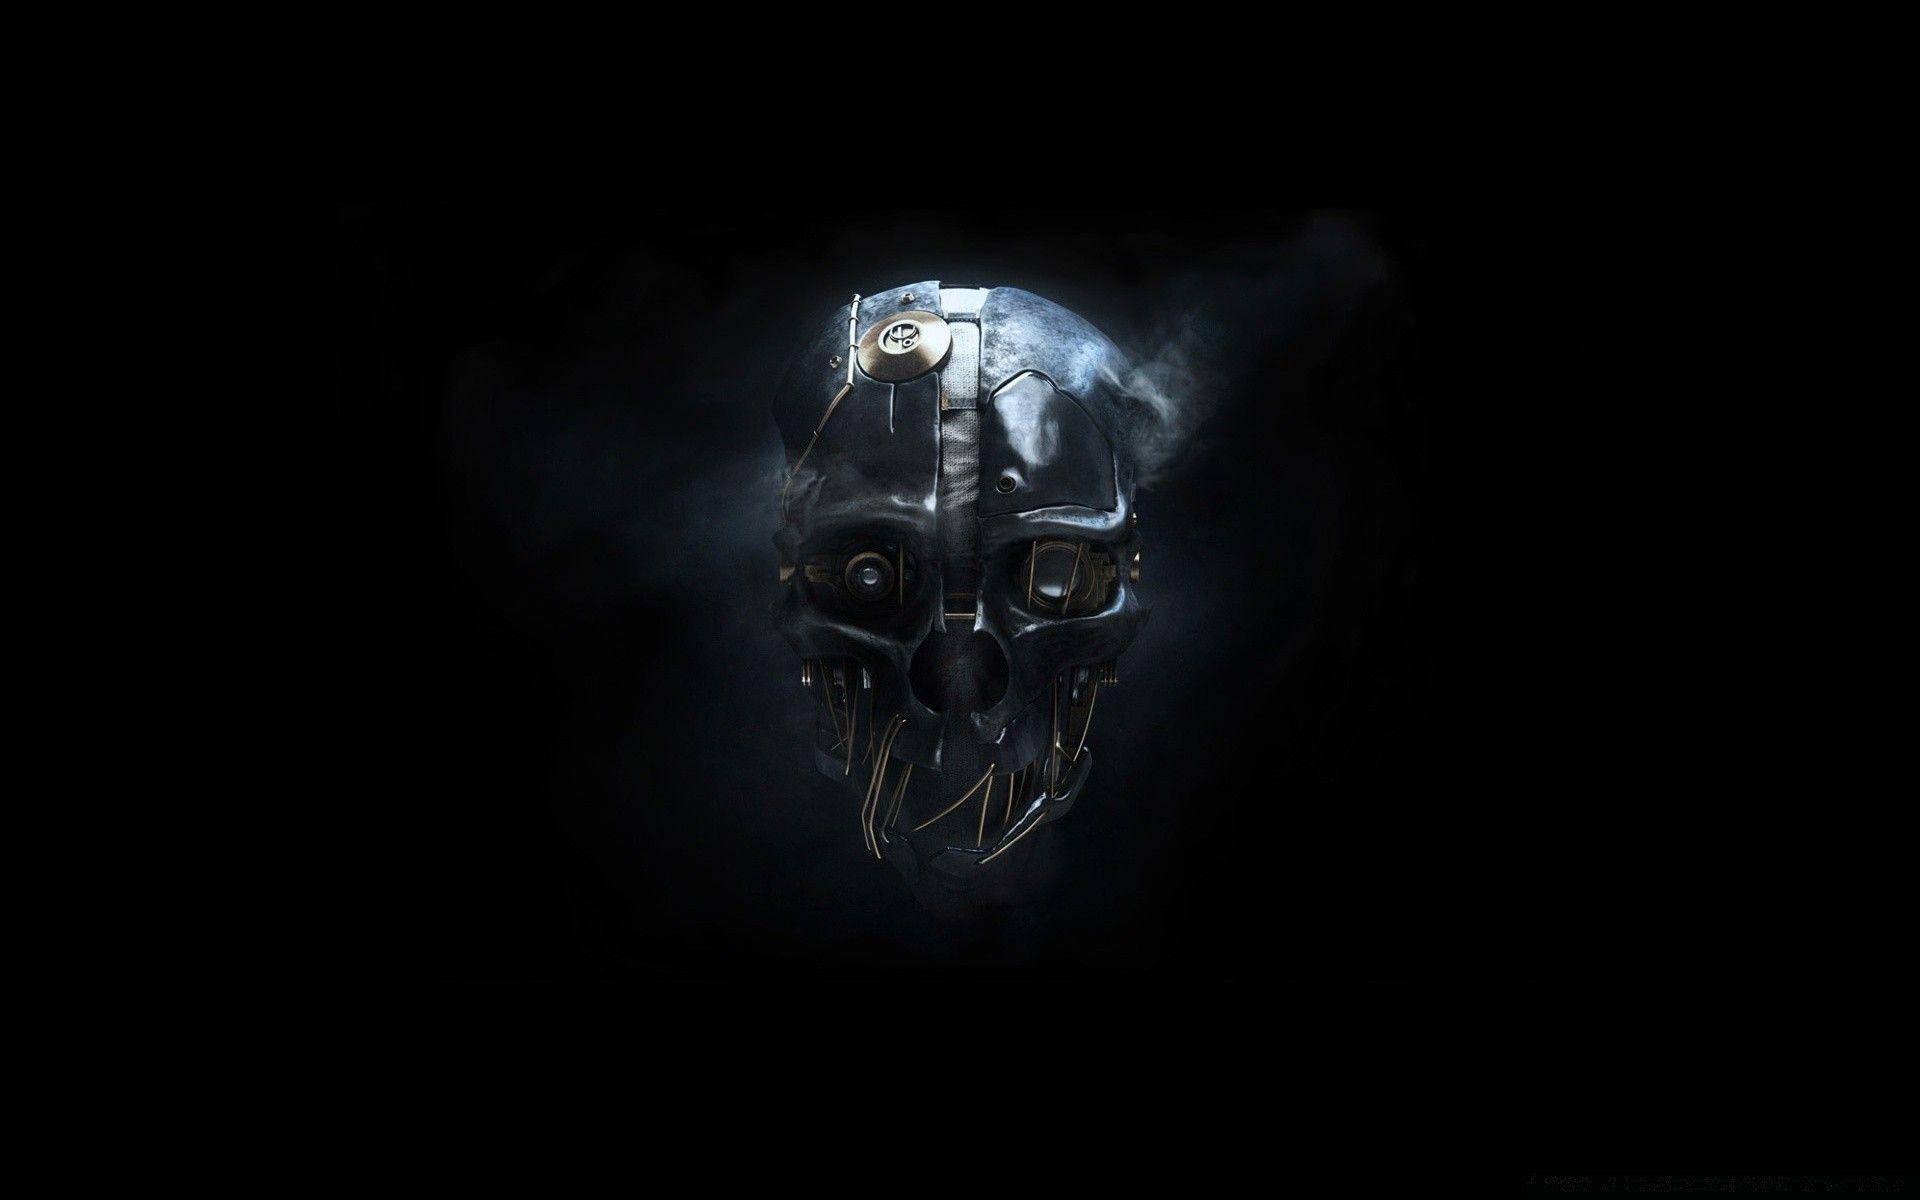 Dishonored Mask. Android wallpaper for free